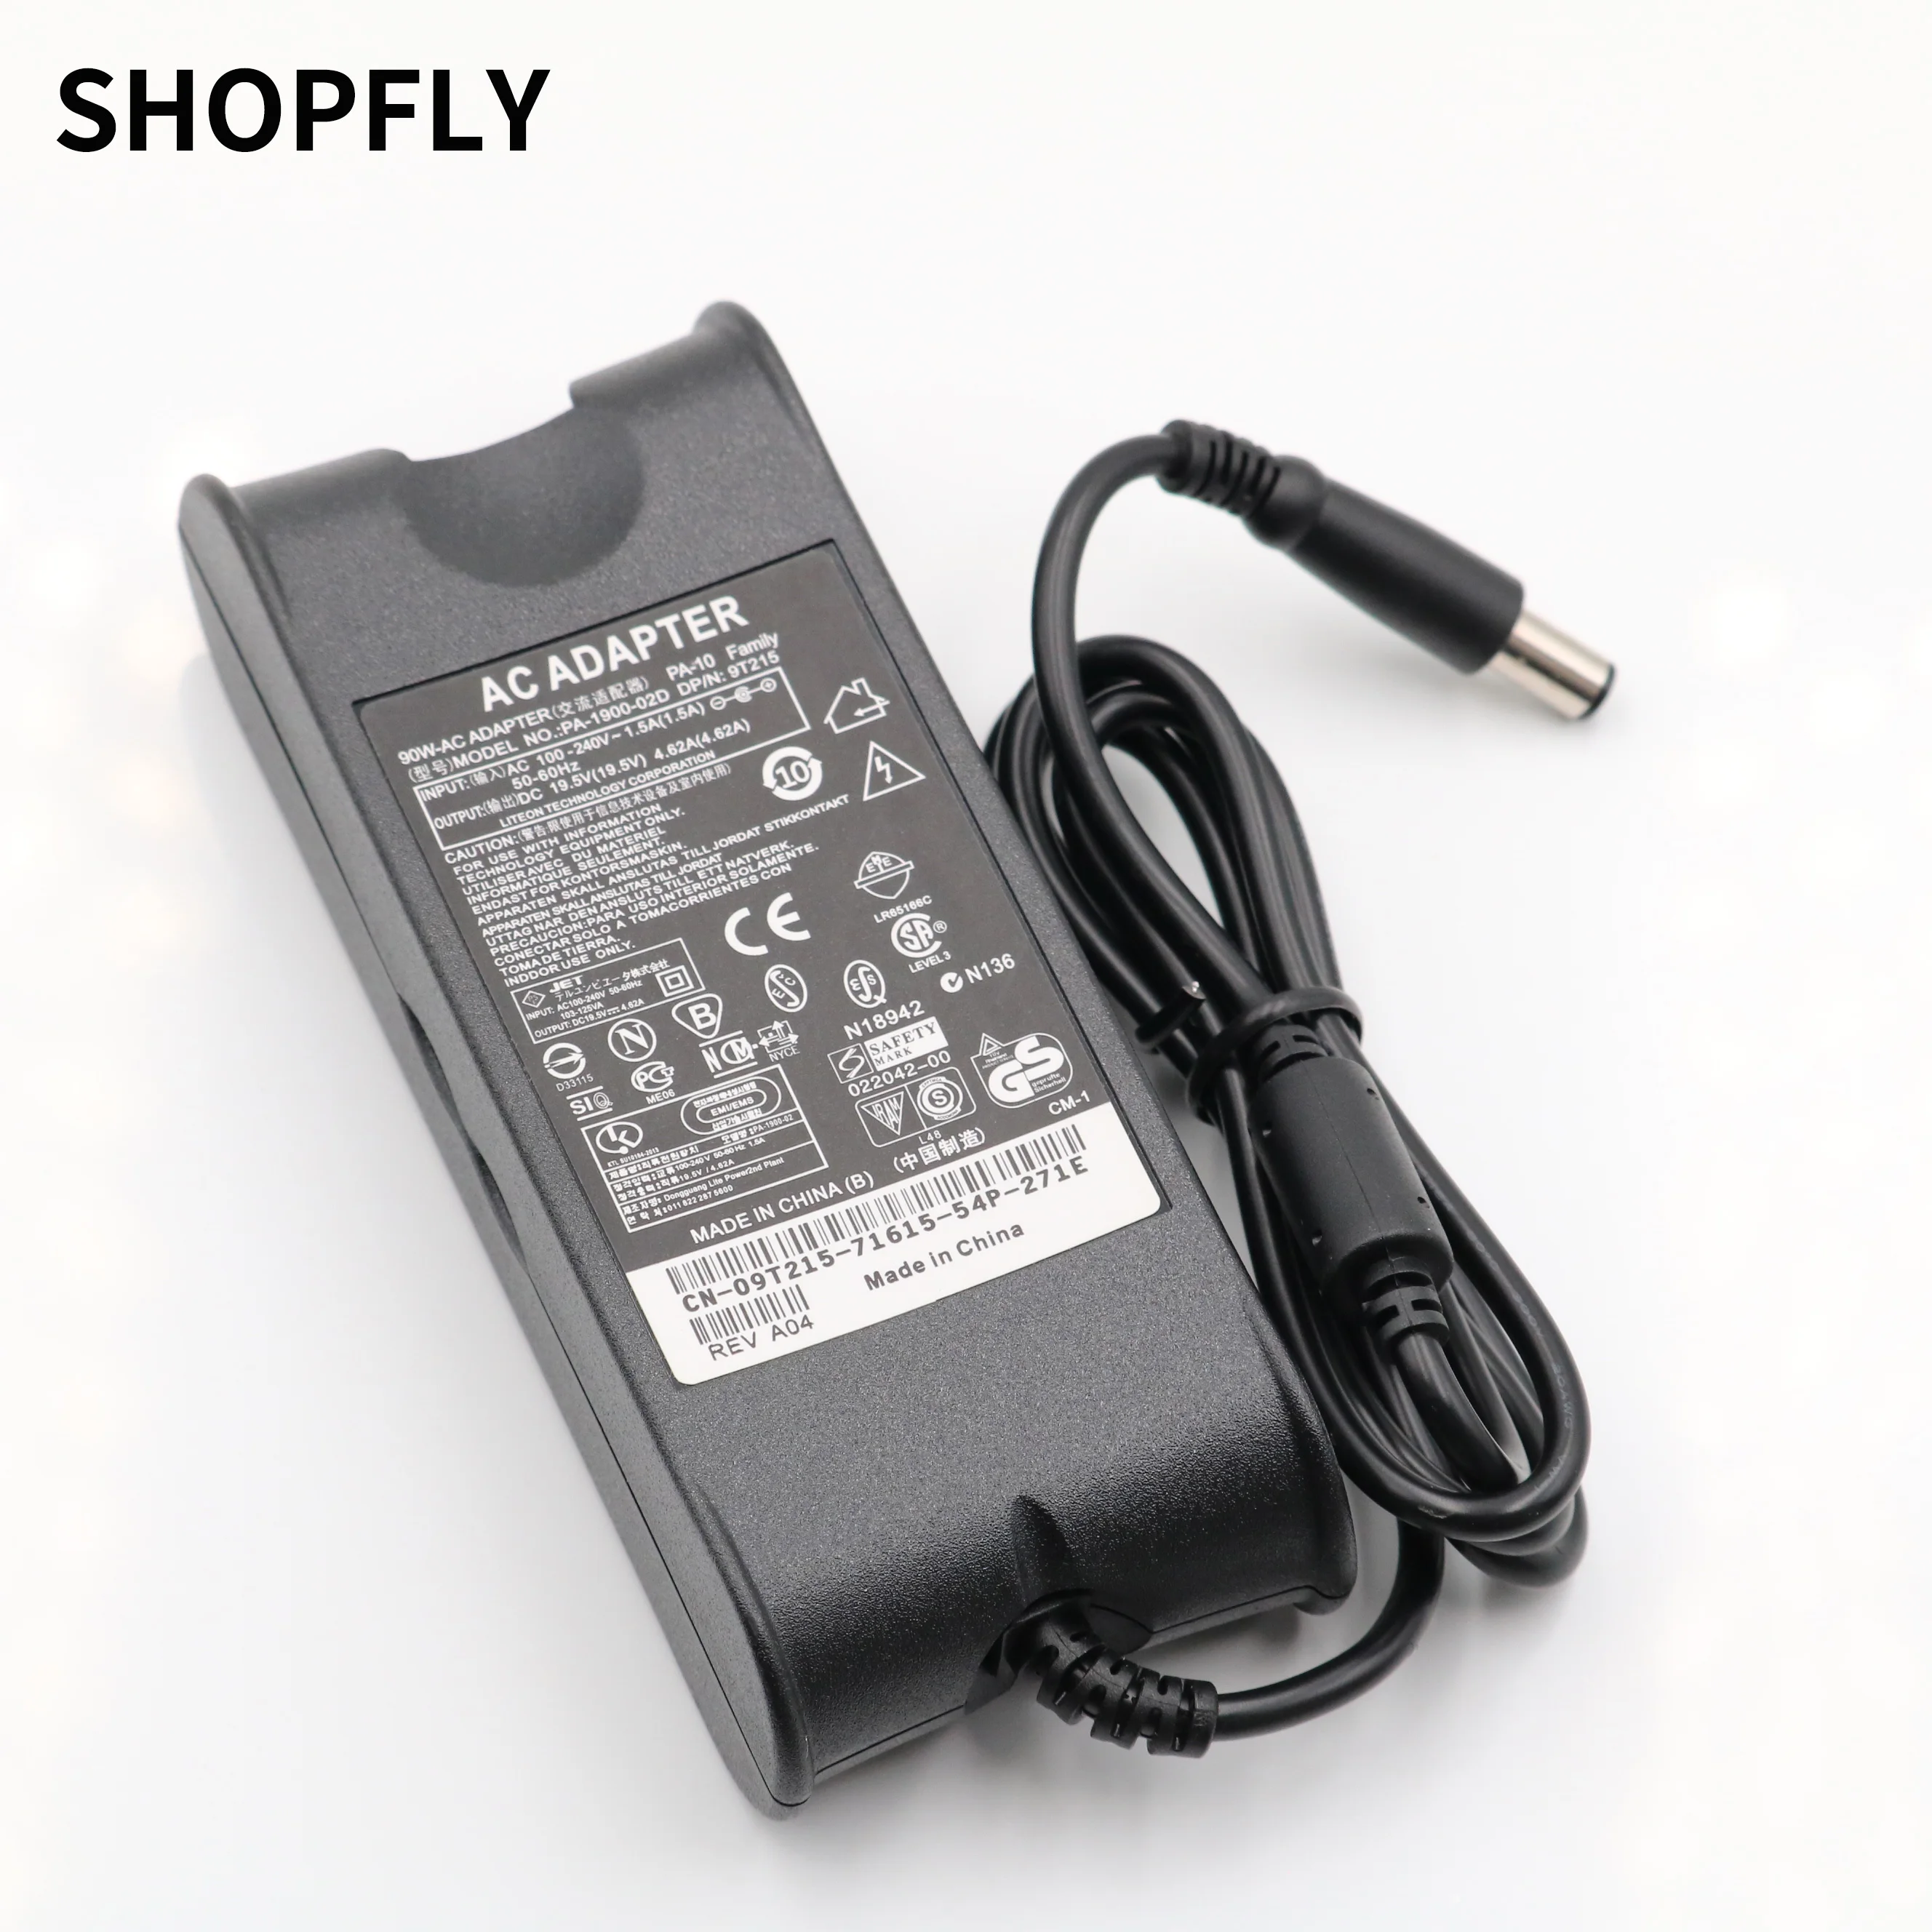 19.5v 4.62a Ac Laptop Adapter For Dell Inspiron 1150 700m N5110 Black Dell Laptop Charger 90w Notebook Computer Adapter - Laptop AliExpress